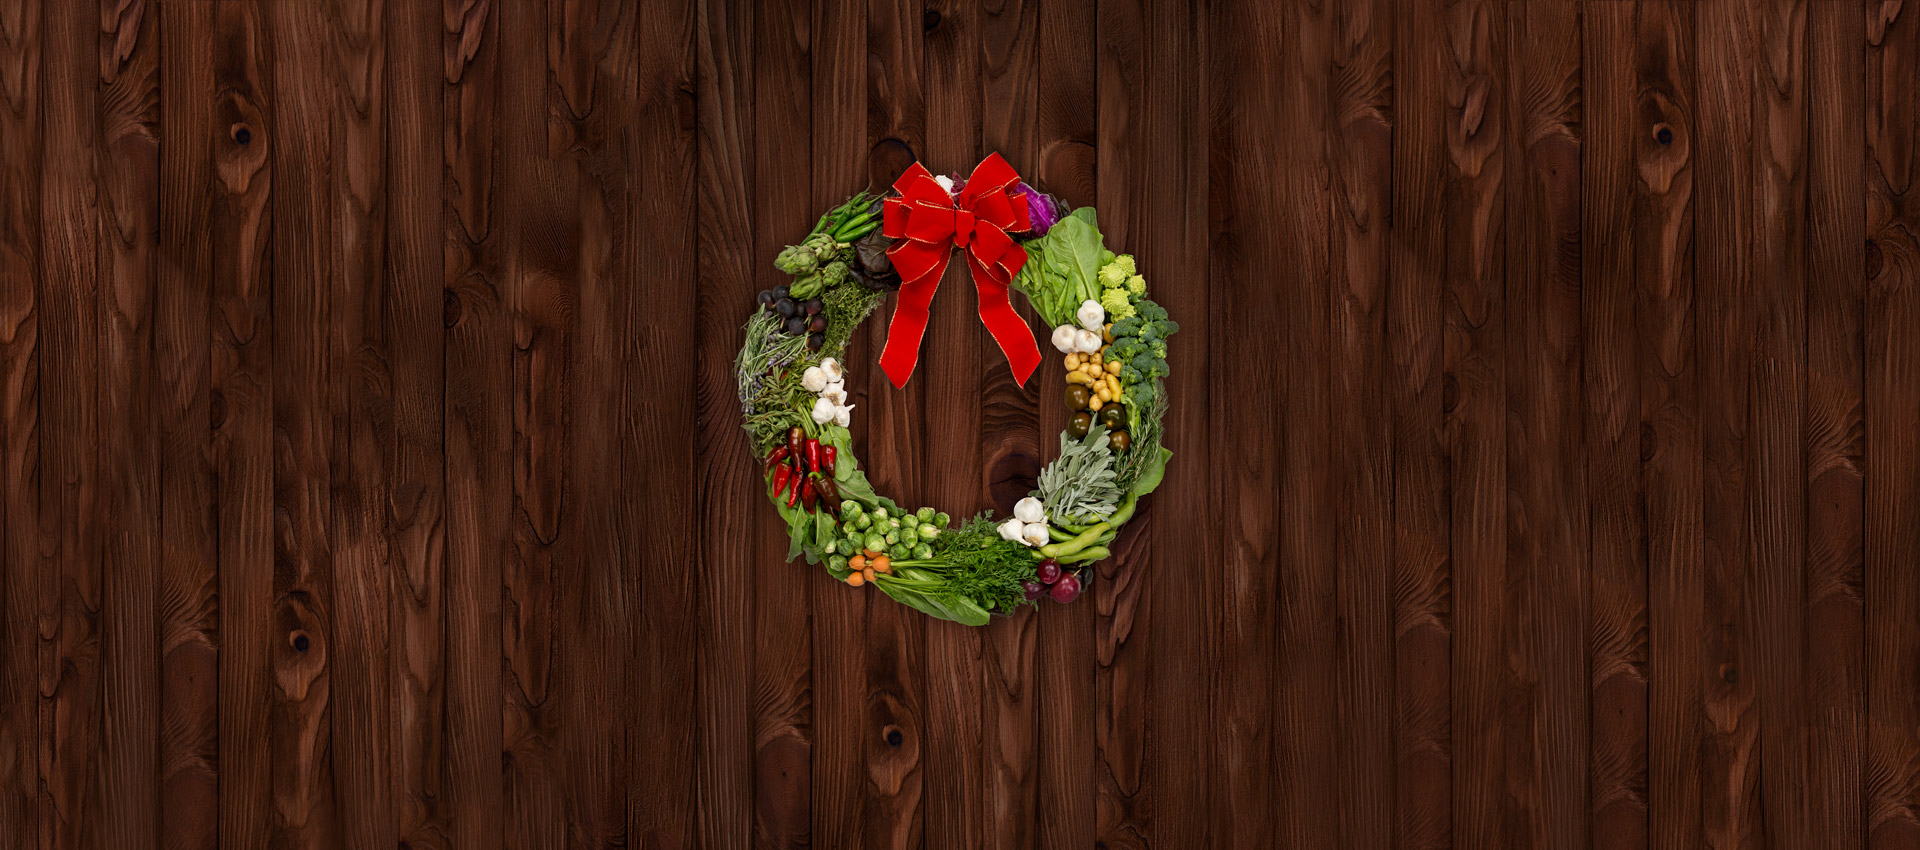 The Ranch wreath poster for Christmas Dinner event